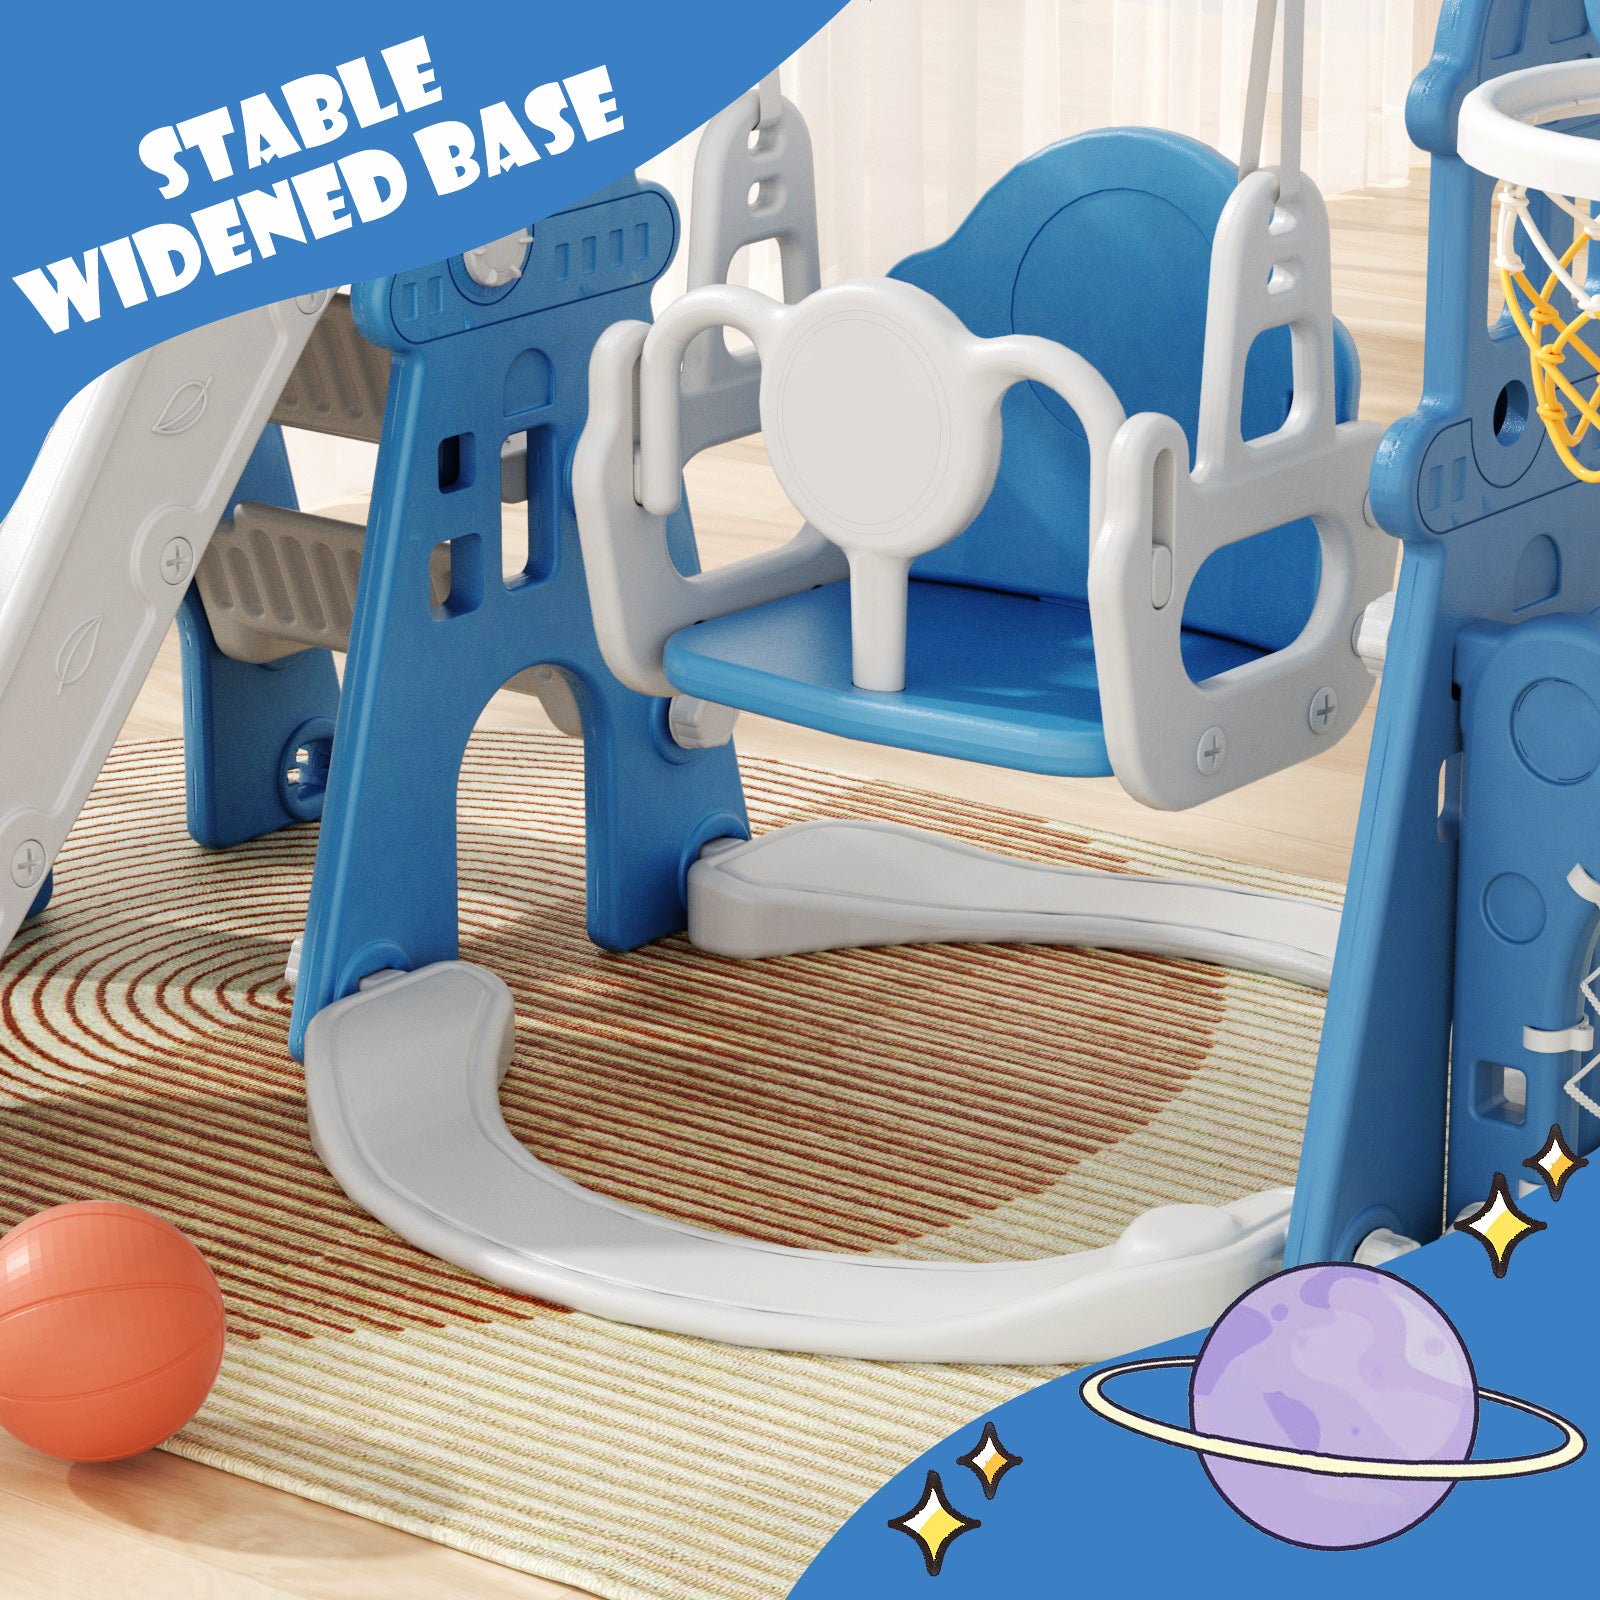 XJD 5-in-1 Toddler Slide and Swing Set Blue In Stock USA